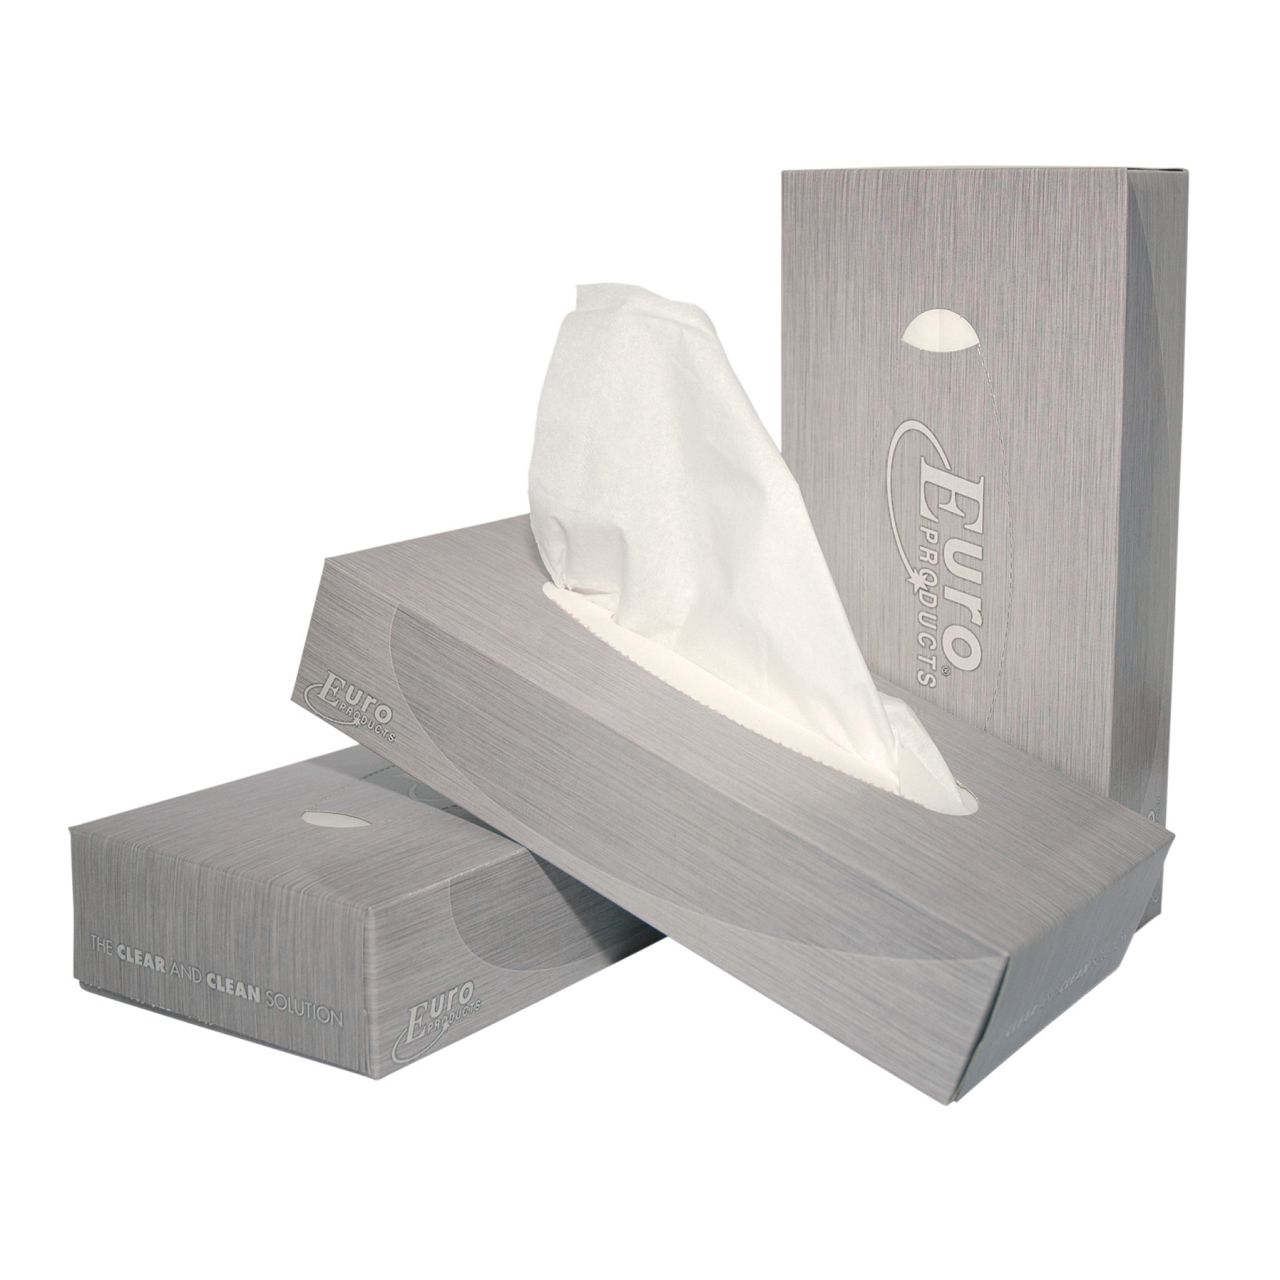 Tissue Box - Facial Tissues - Euro Products - 2-laags